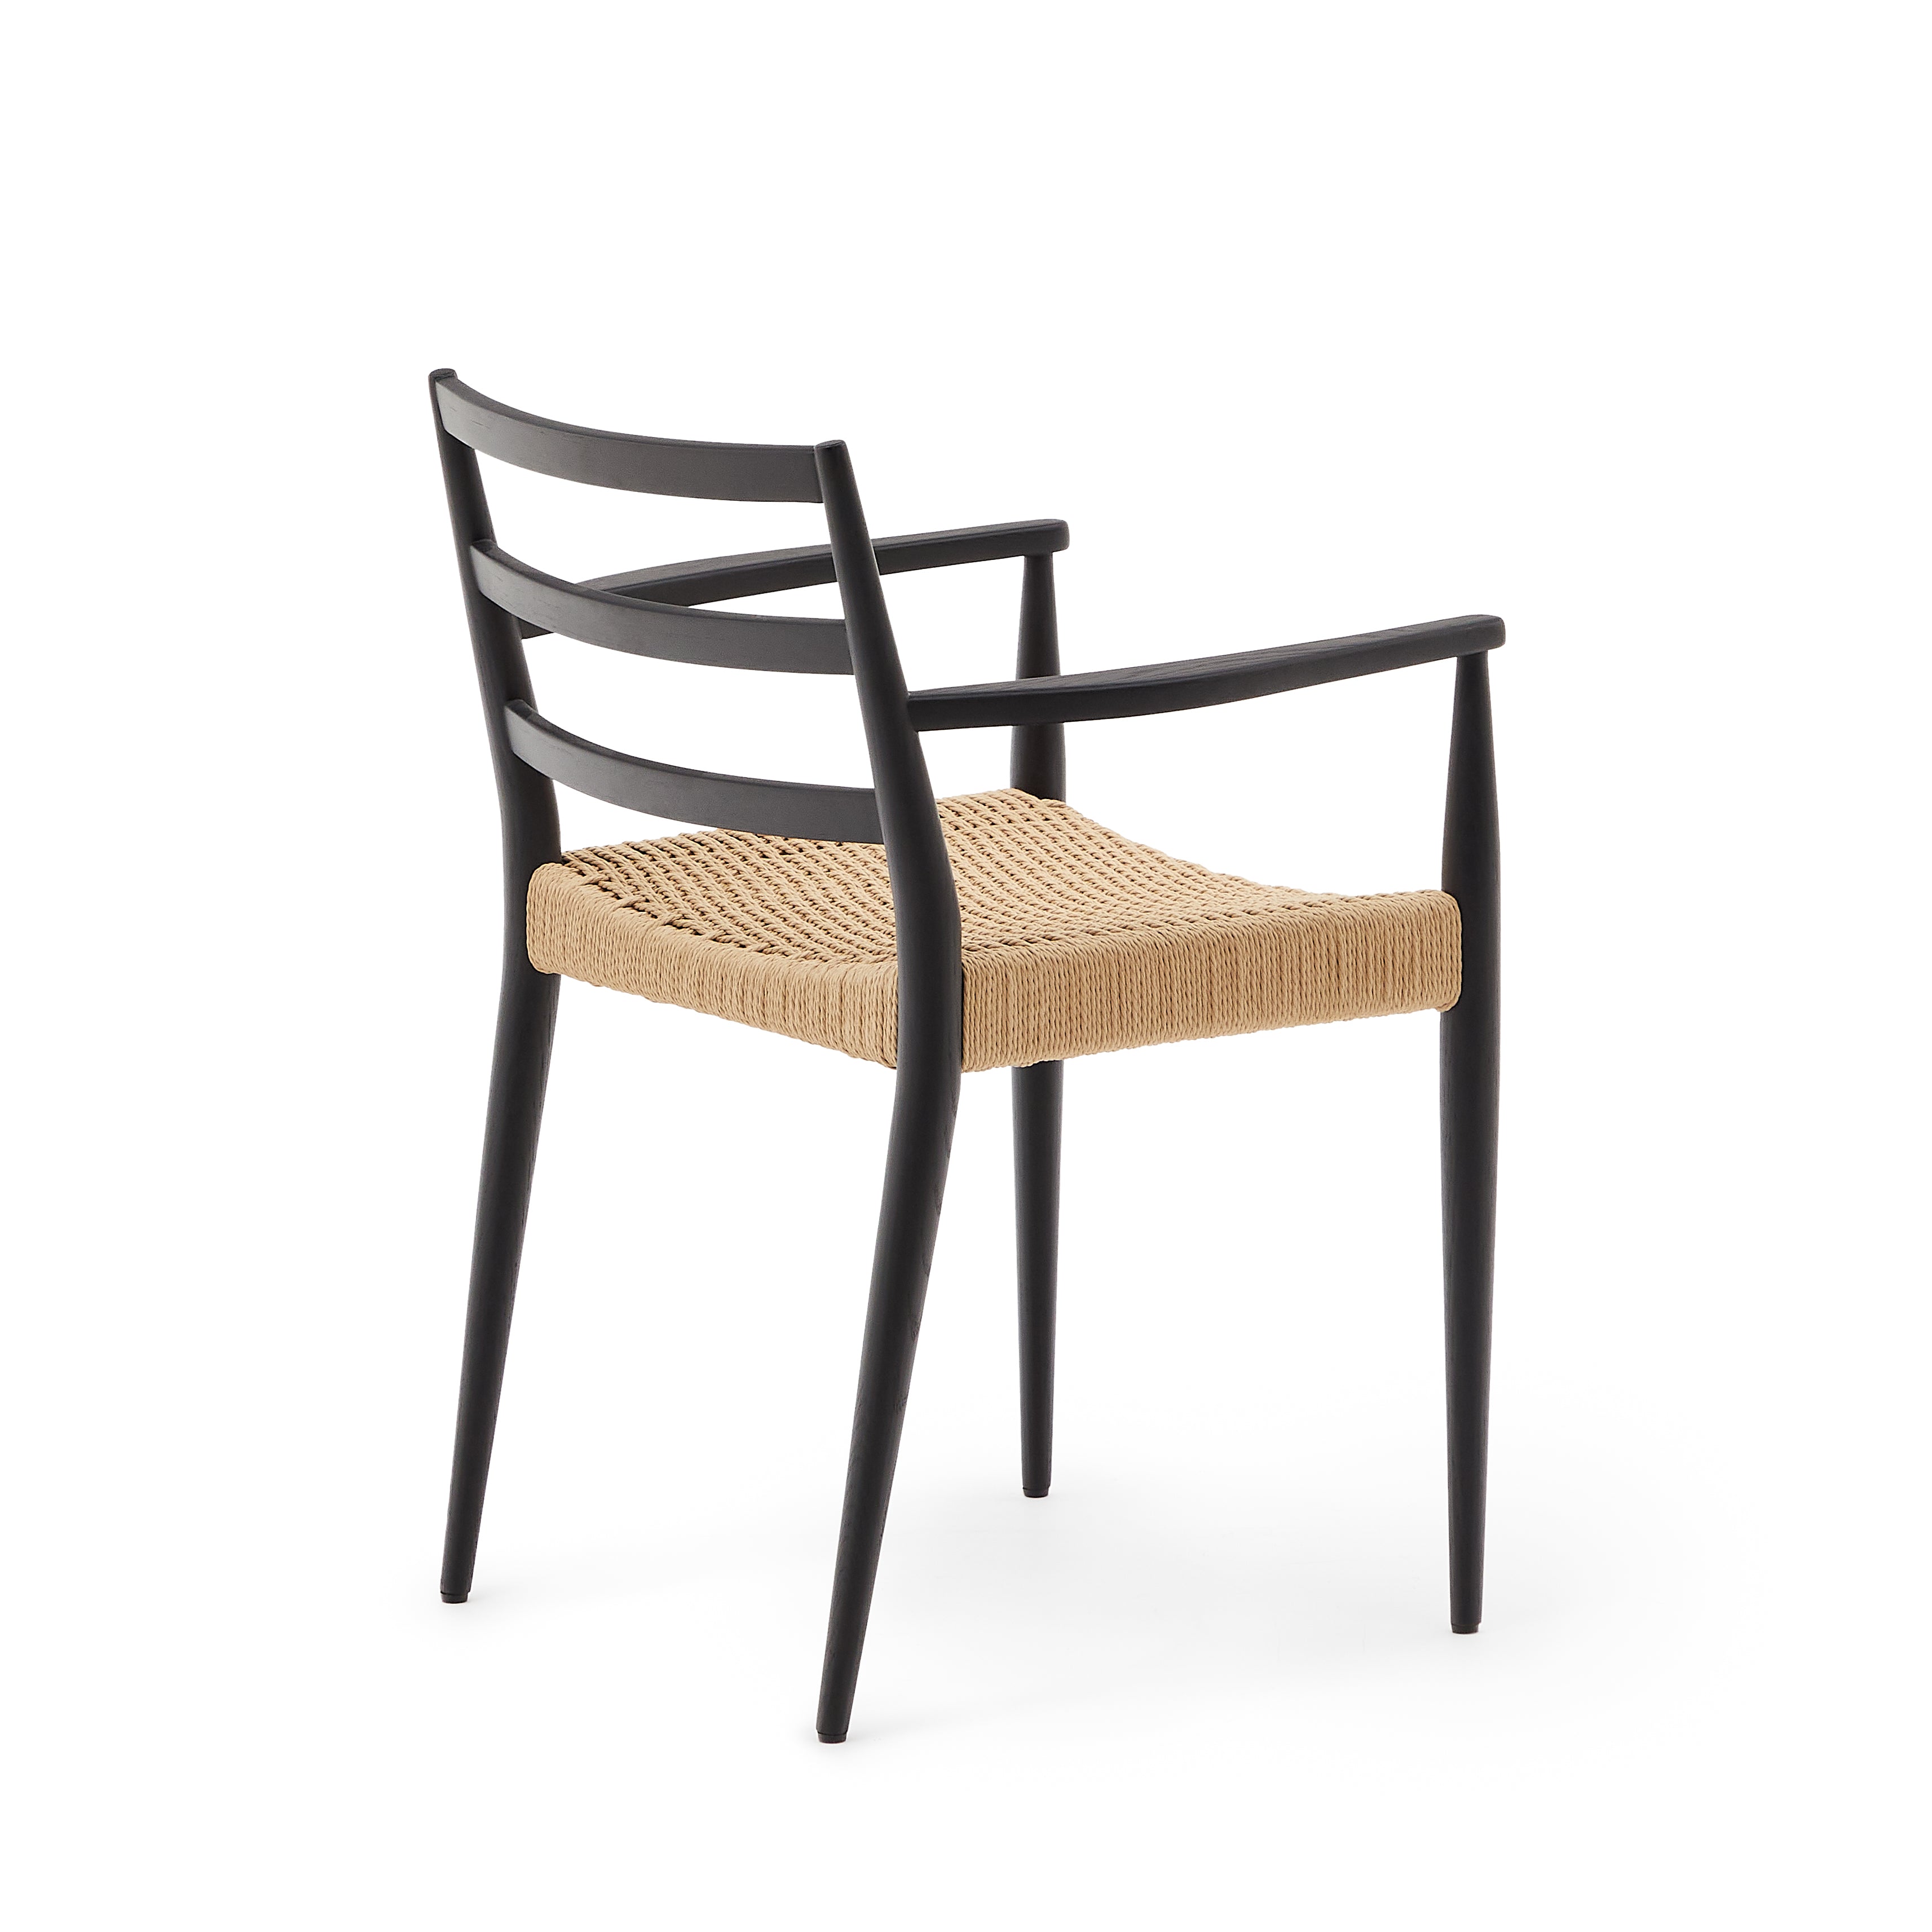 Analy chair with armrests, solid oak, 100% FSC black finish and rope seat